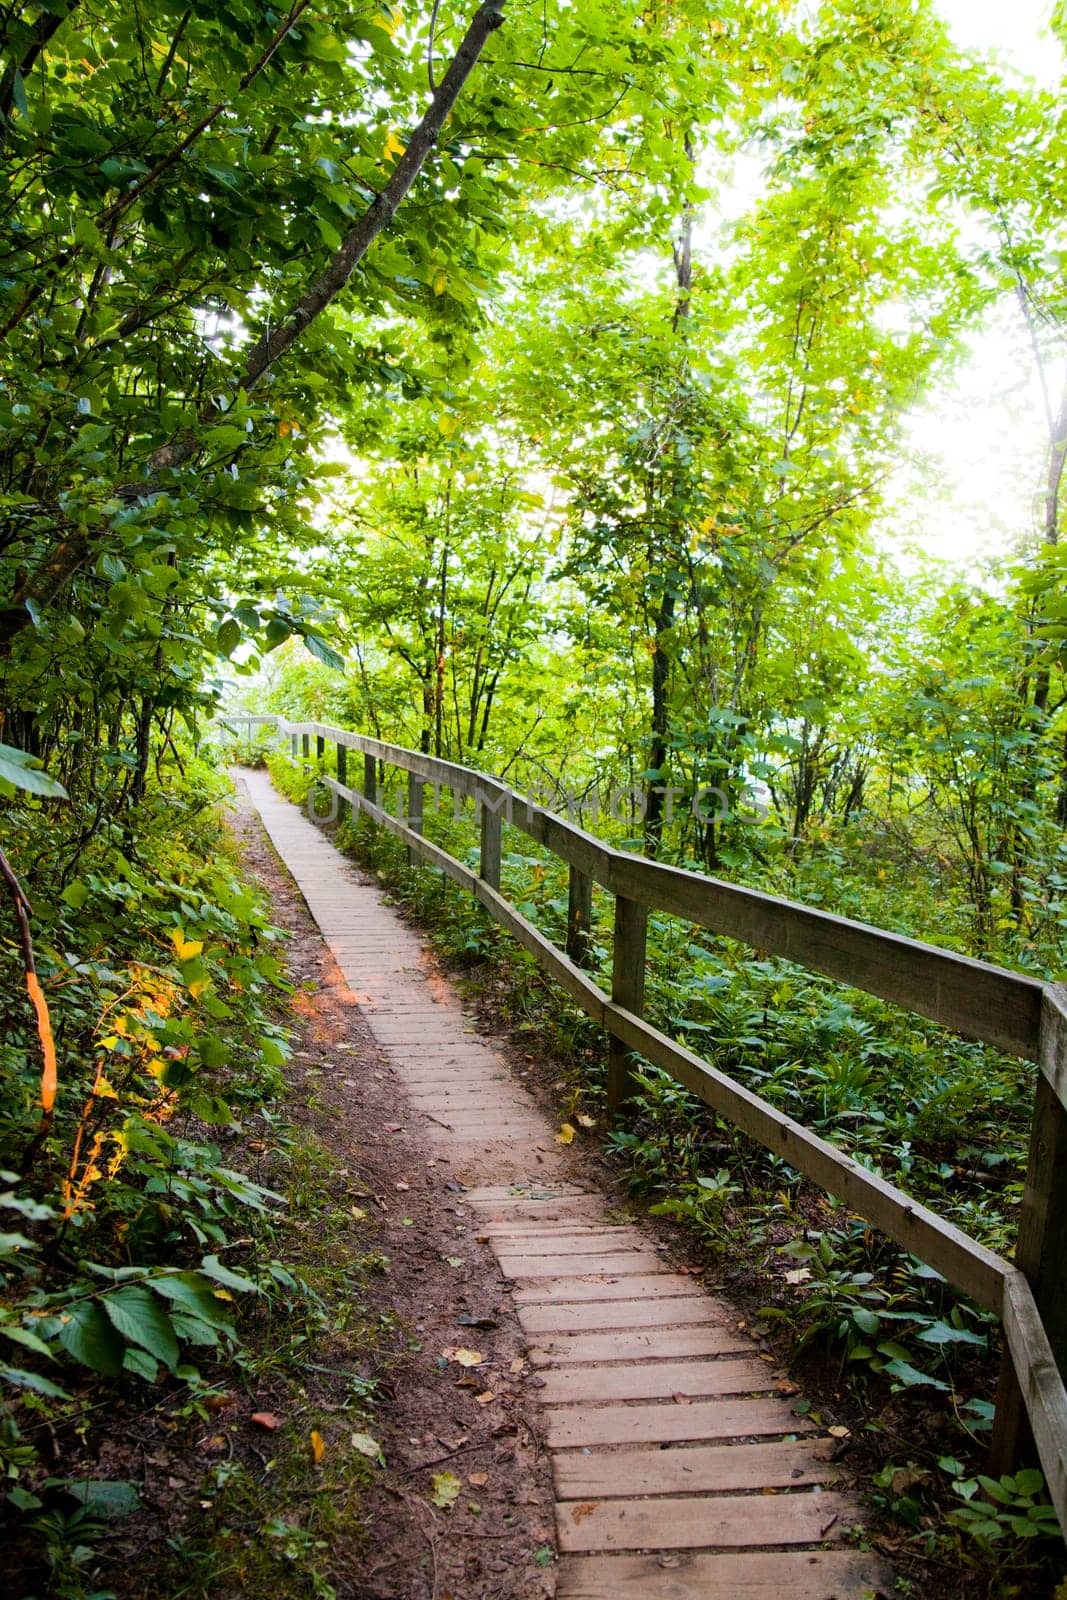 Escape to the serenity of Empire, Michigan's lush green forest with this inviting wooden boardwalk. Journey through nature's tranquility and immerse yourself in the vibrant foliage of a temperate forest. Perfect for evoking eco-friendliness.